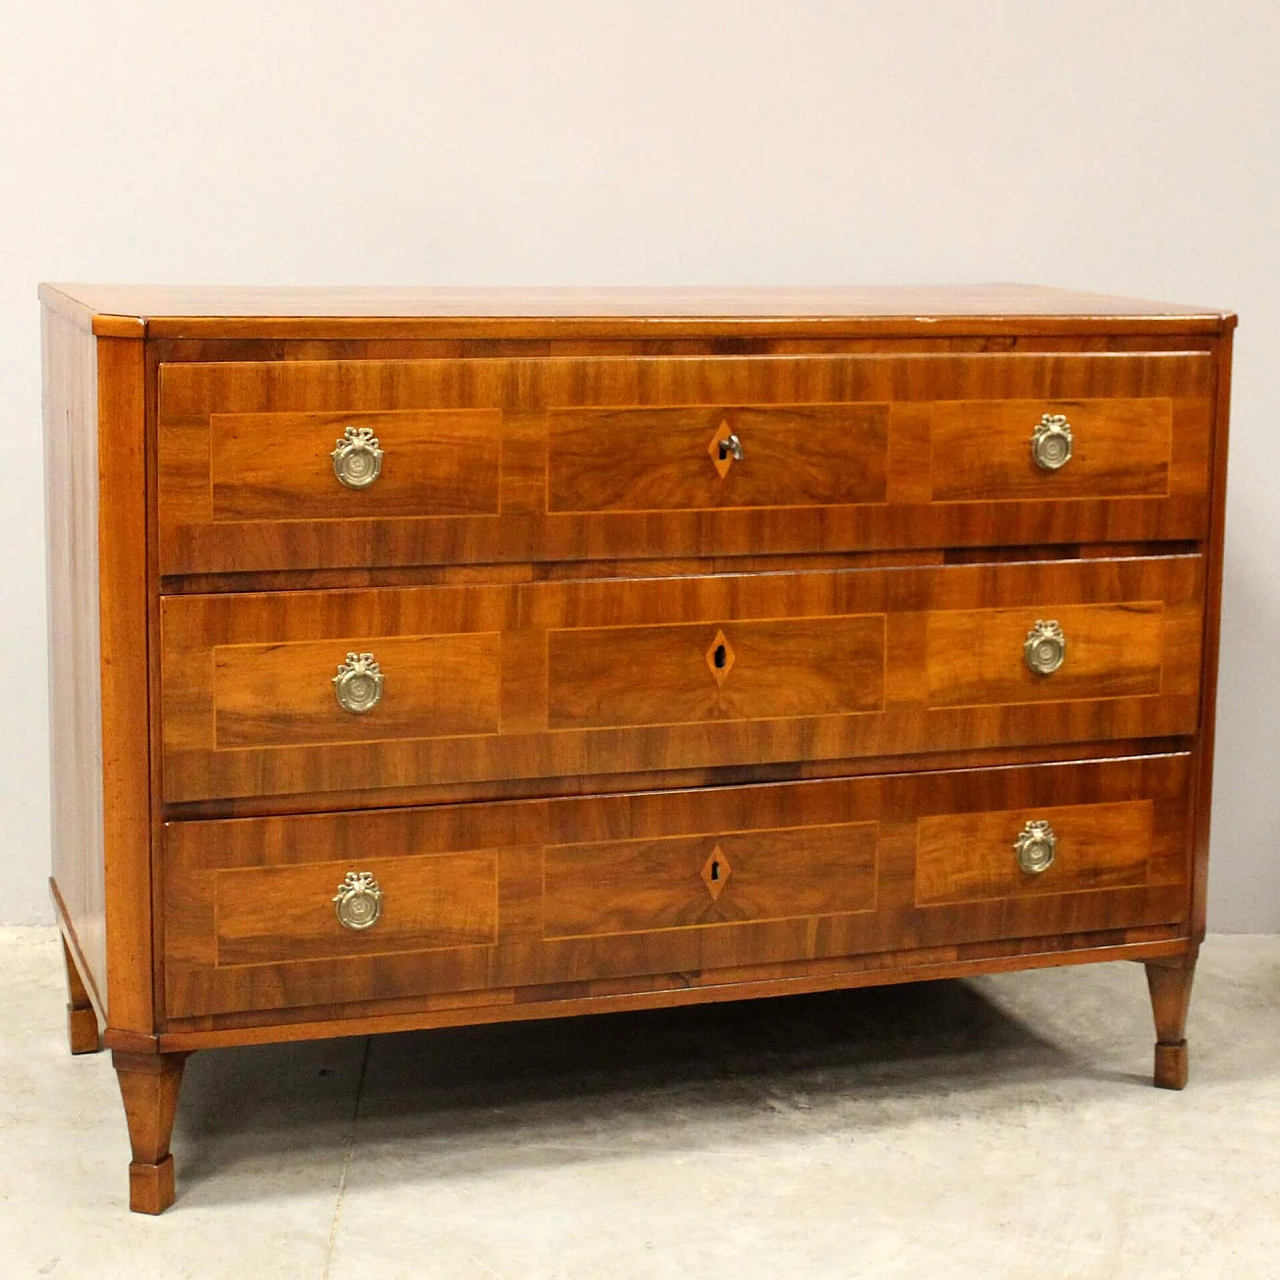 Direttorio chest of drawers in inlaid walnut, second half of the 18th century 2